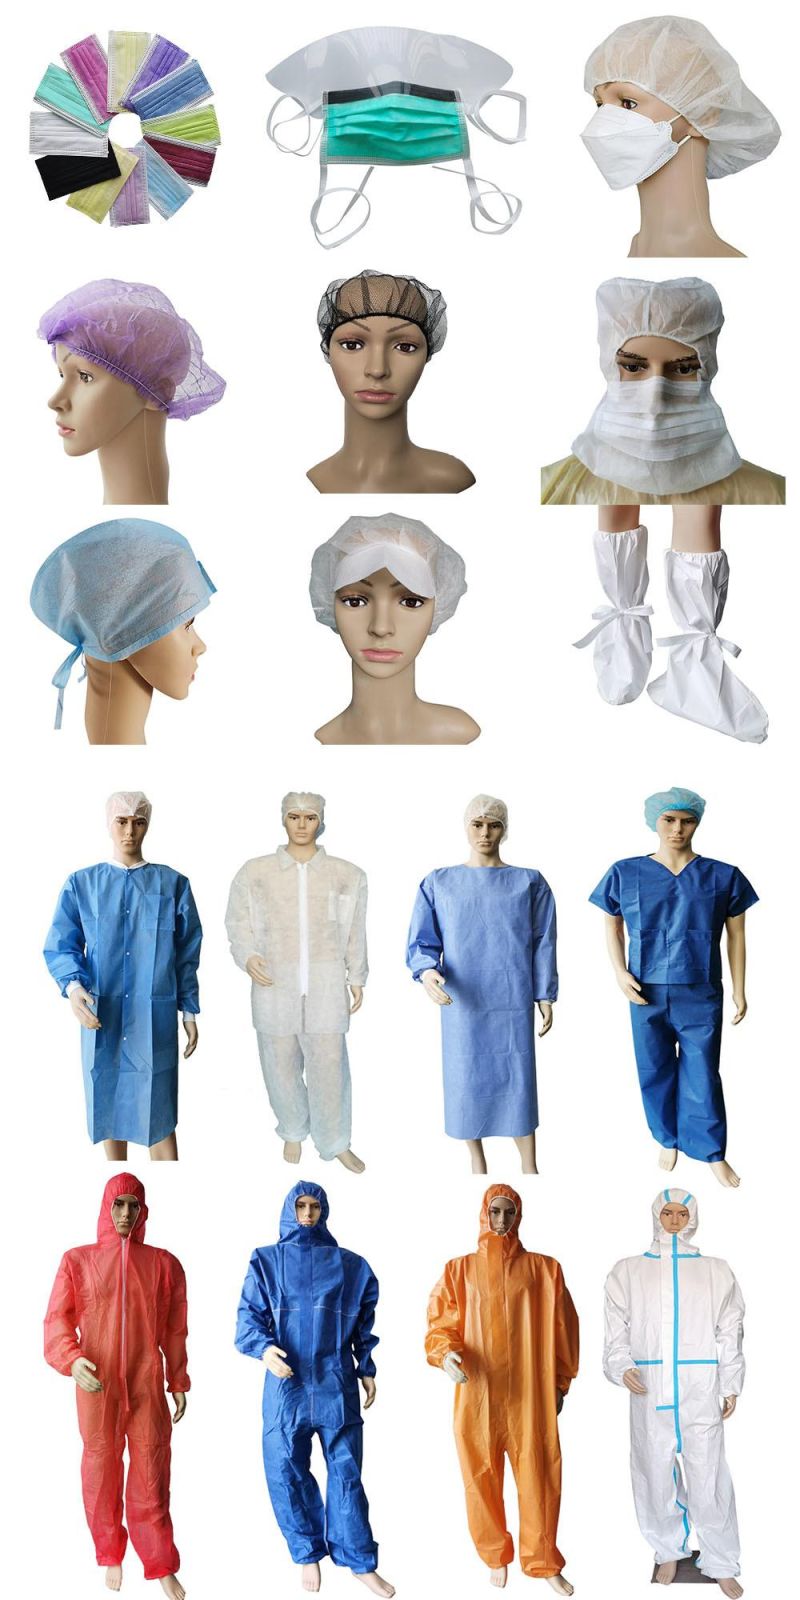 Head Cover Breathable Peaked SBPP Salon and SPA Room Dust Free Workshop Food Factory Non Woven Mop Cap